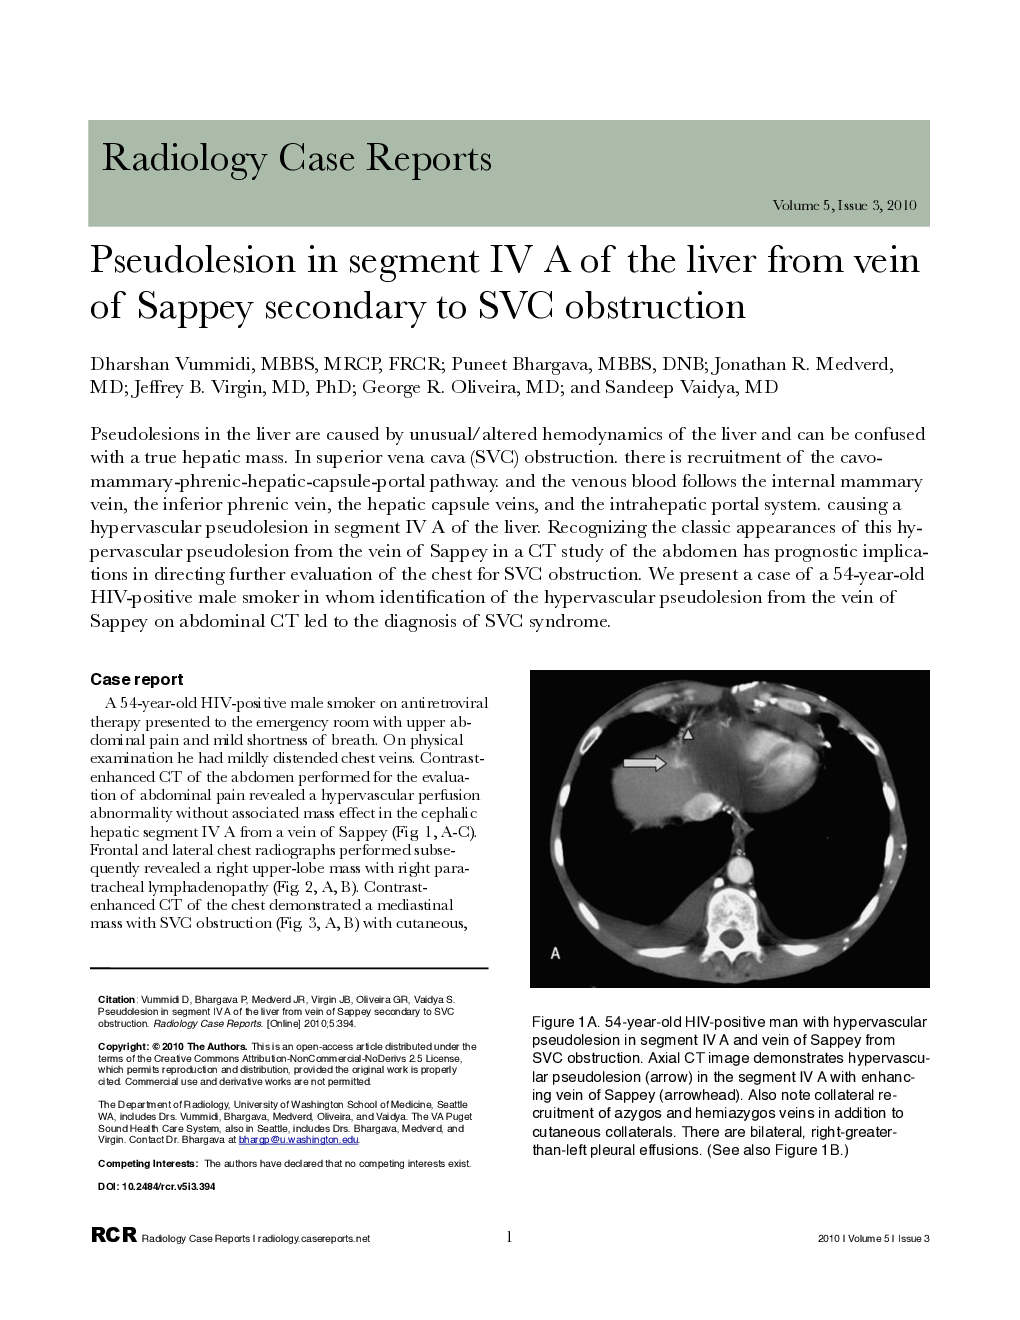 Pseudolesion in segment IV A of the liver from vein of Sappey secondary to SVC obstruction